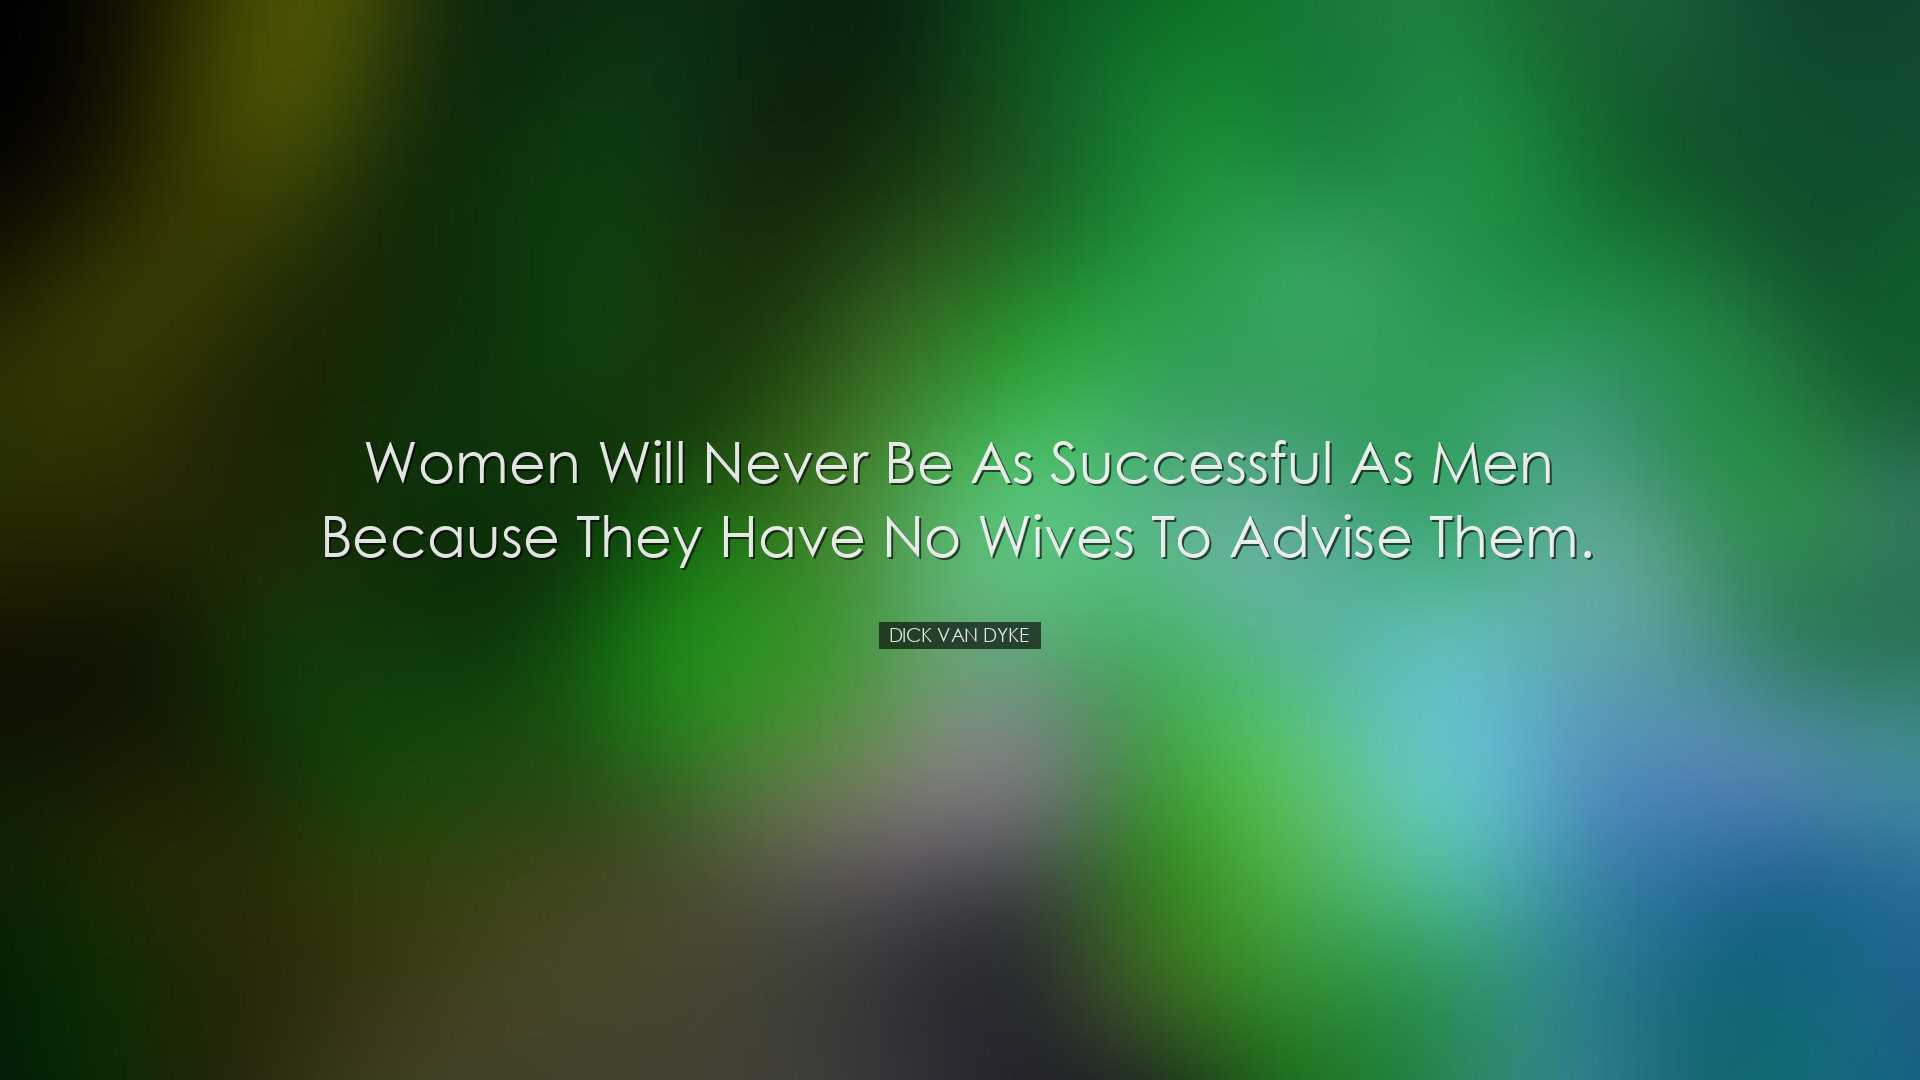 Women will never be as successful as men because they have no wive